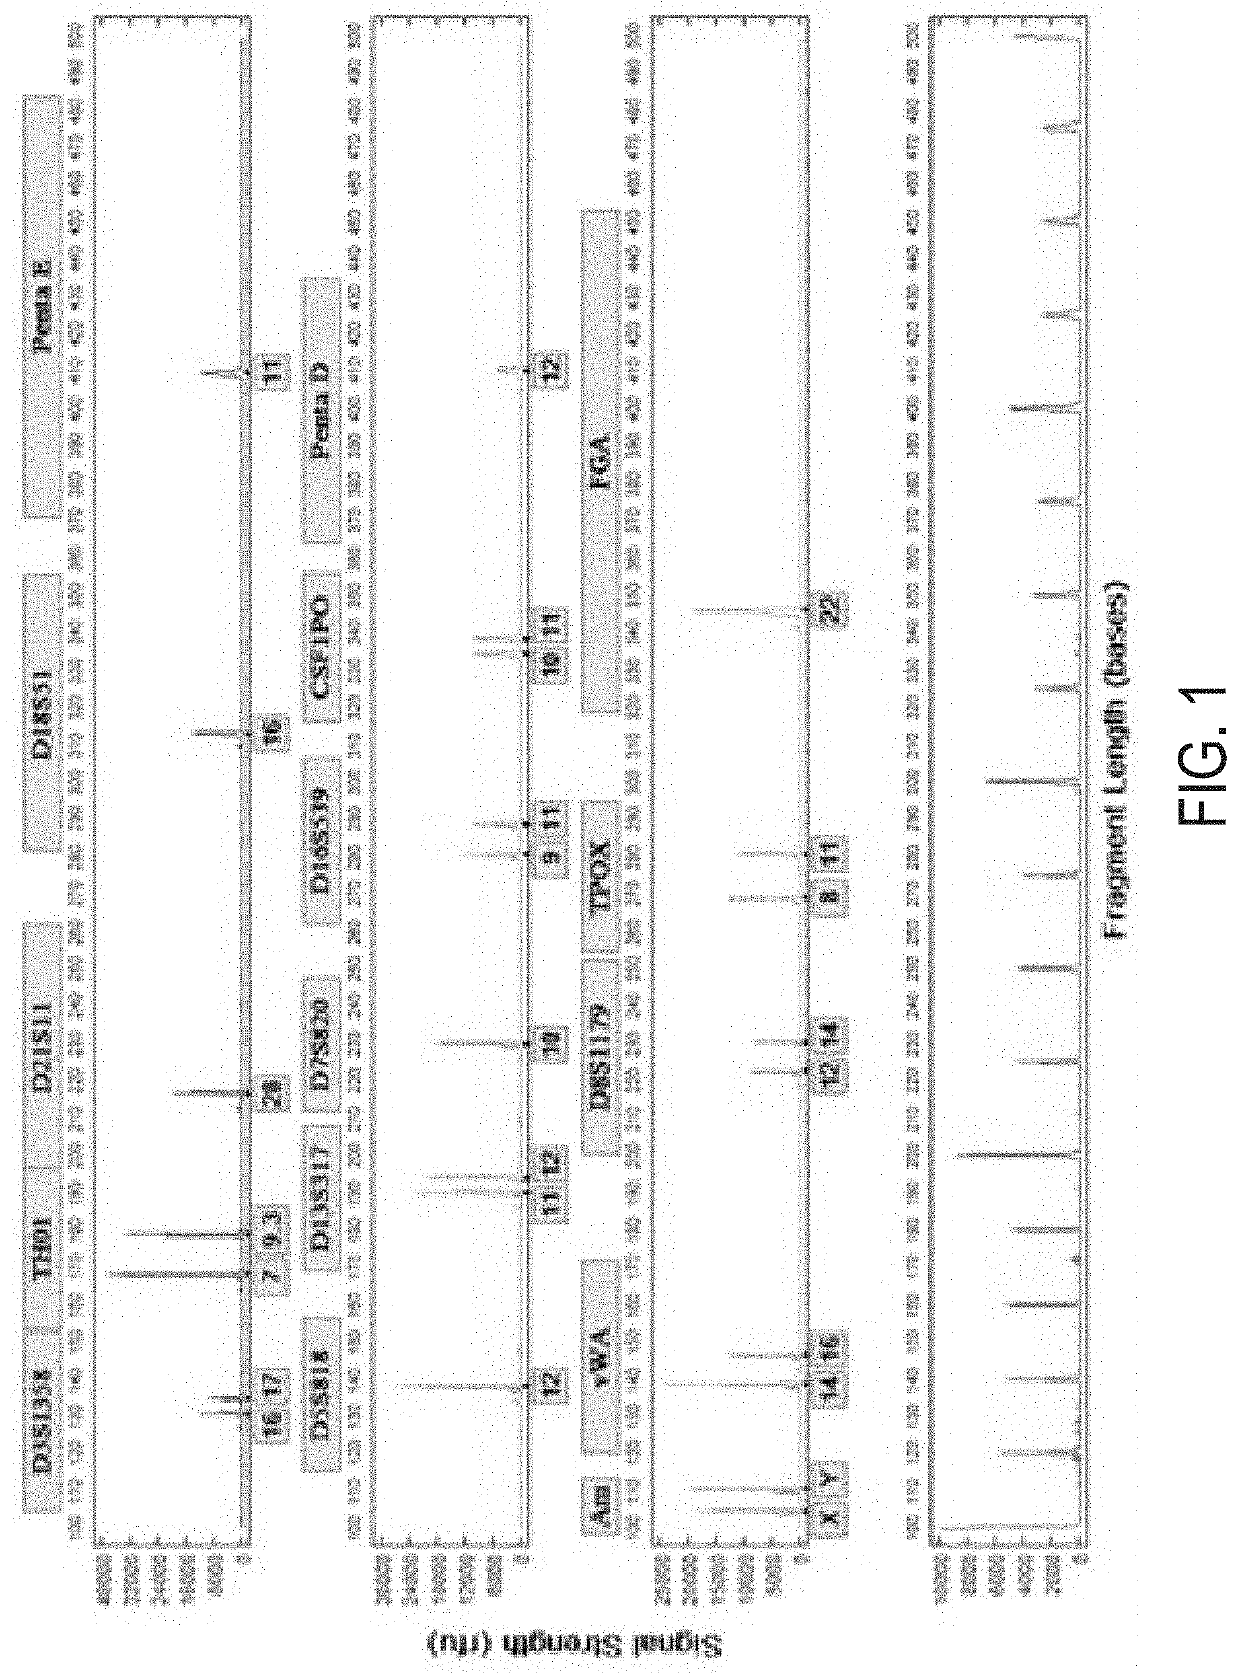 Systems and methods for rapid nucleic acid extraction, purification and analysis from bone and tooth